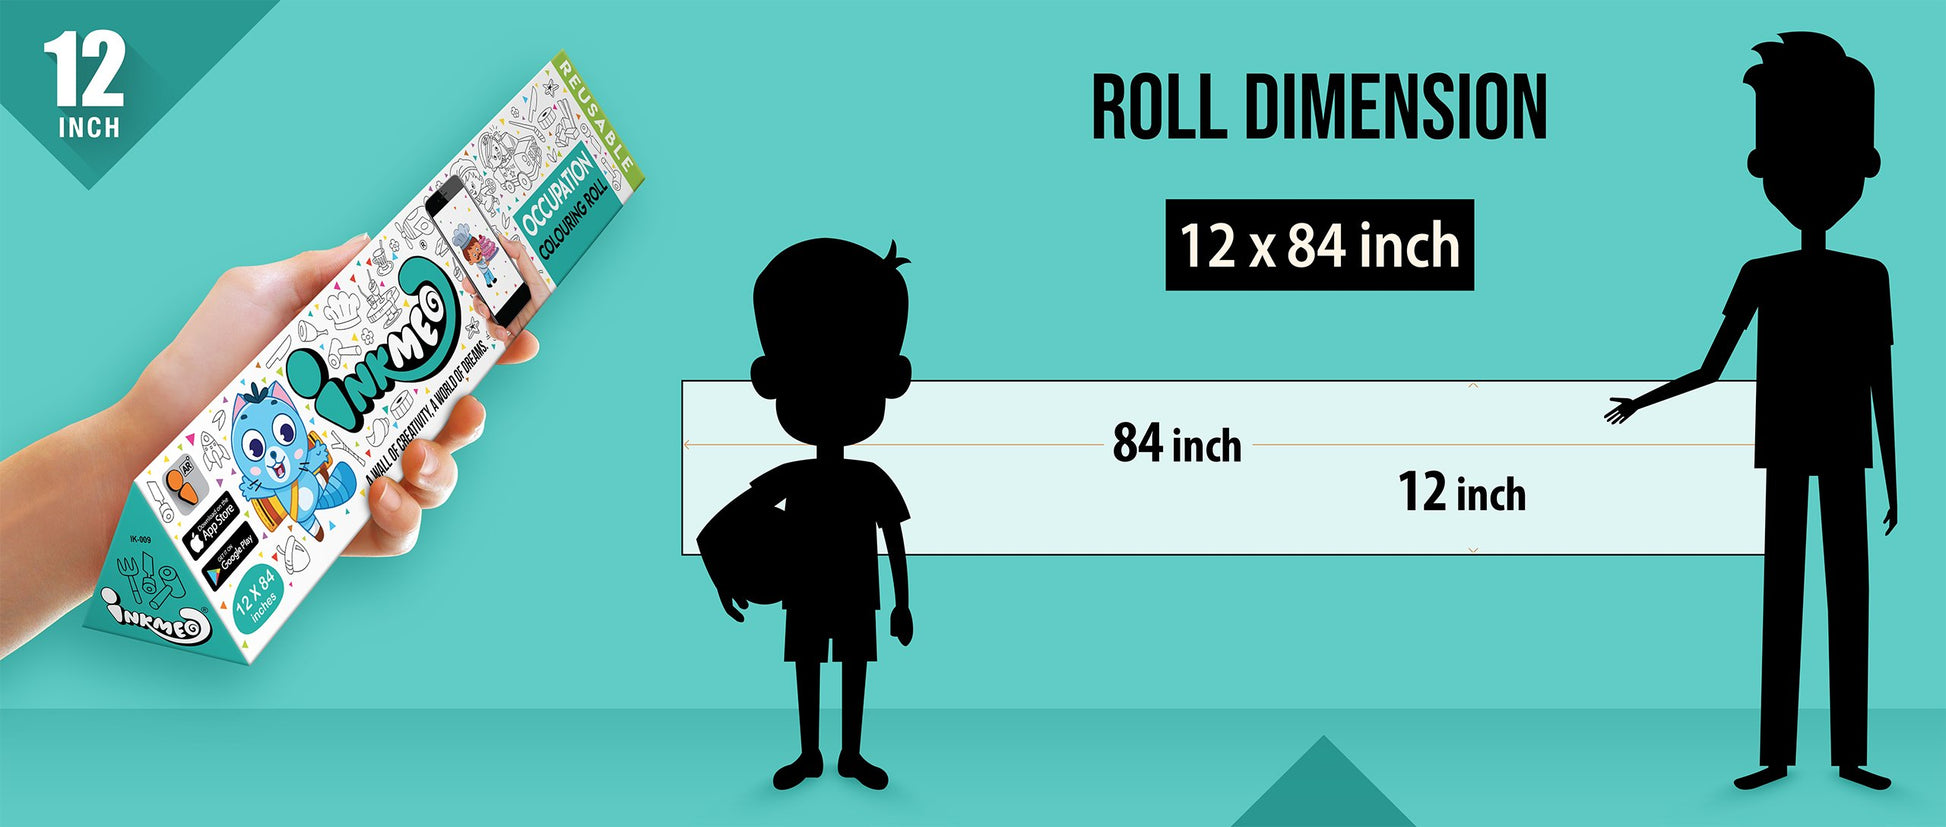 The image shows a green background with a ruler indicating child and adult height on an 12*84 inch paper roll dimension.